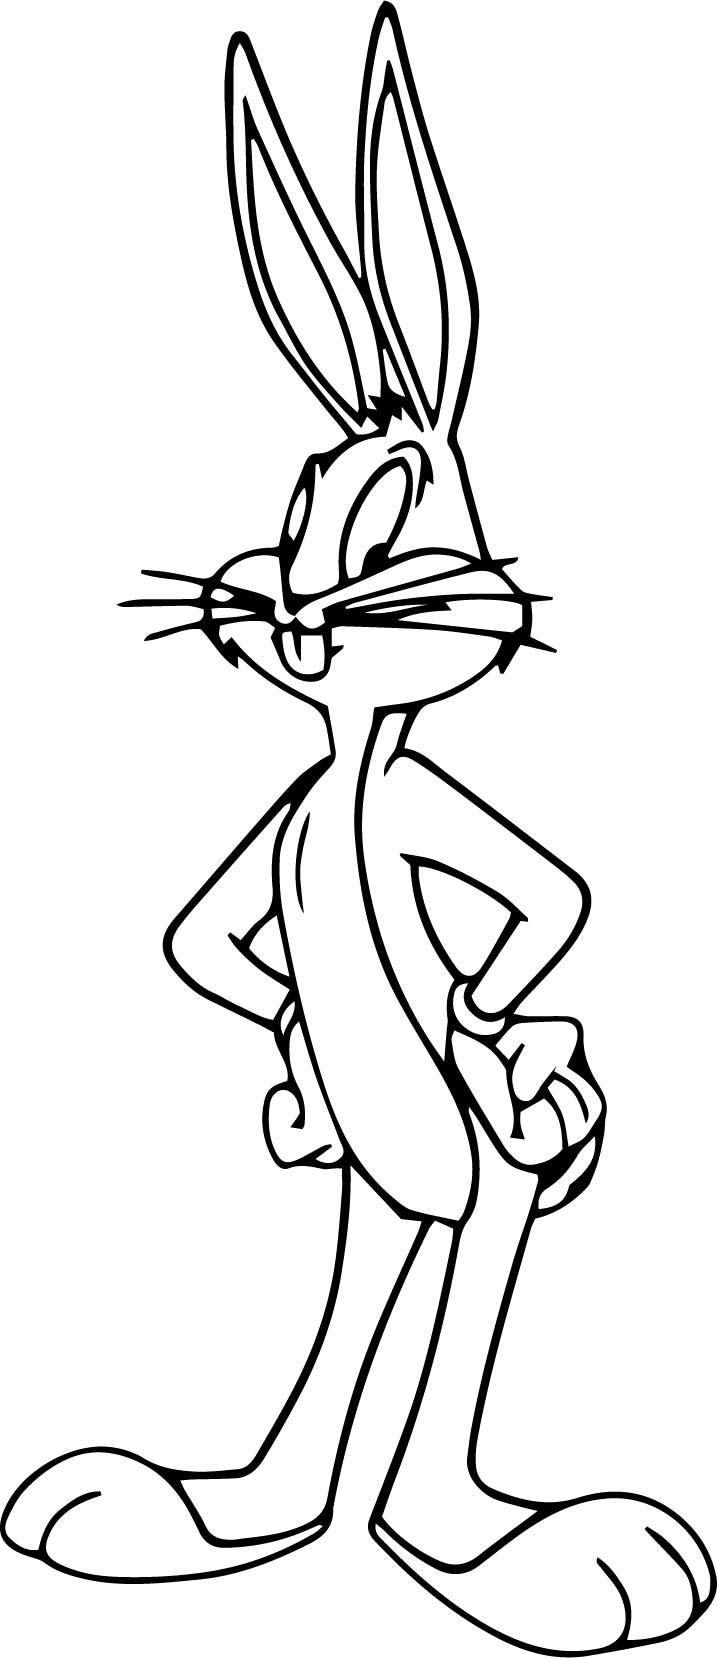 Free Coloring Pages Bugs Bunny
 Bugs Bunny Coloring Page